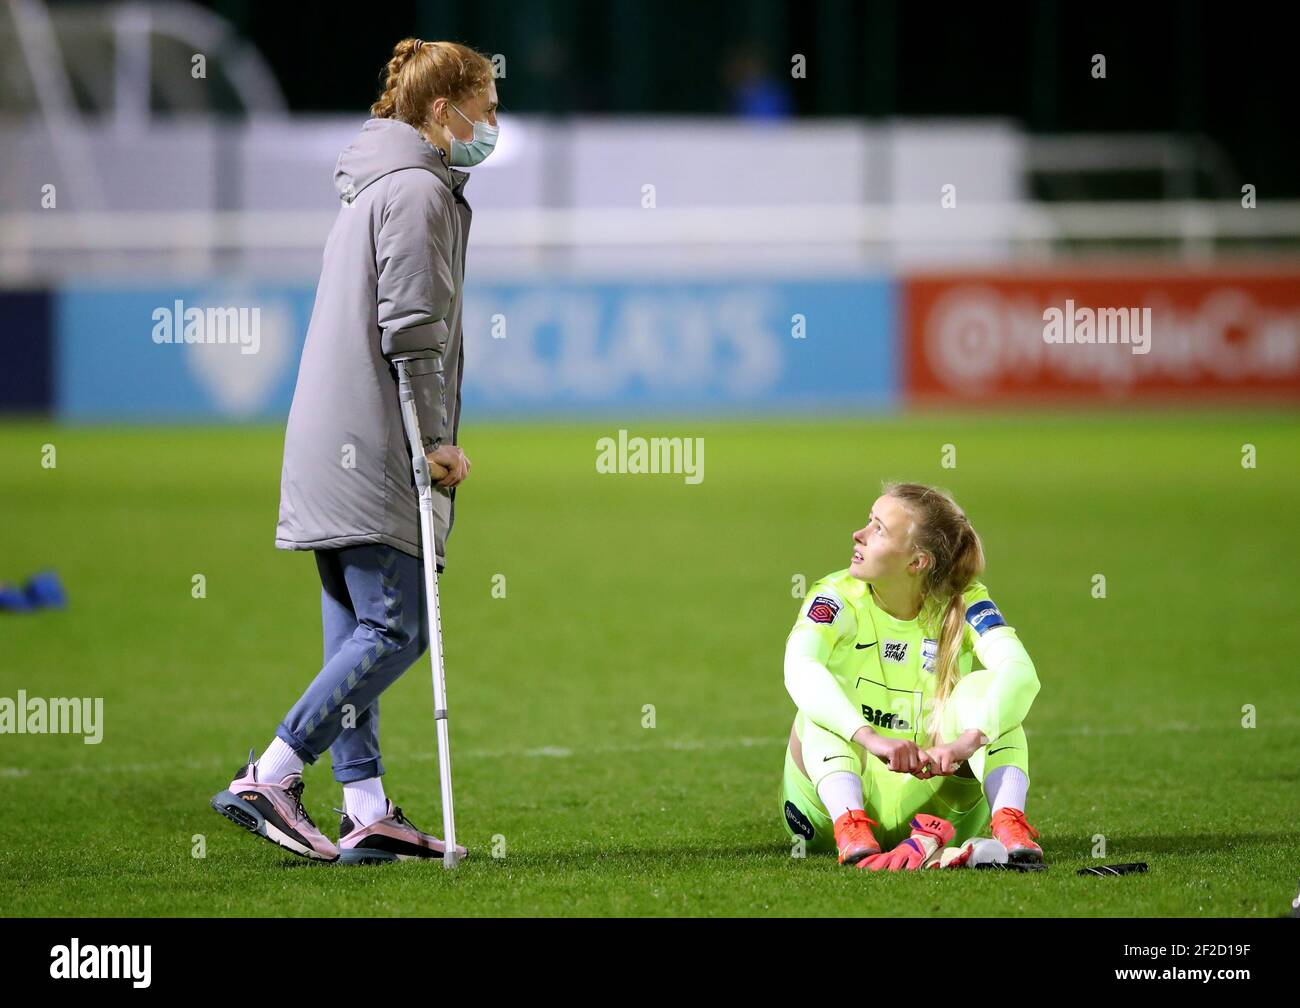 Everton goalkeeper Sandy MacIver (left) speaks to Birmingham City goalkeeper Hannah Hampton at the end of the FA Women's Super League match at the SportNation.bet Stadium, Solihull. Picture date: Thursday March 11, 2021. Stock Photo